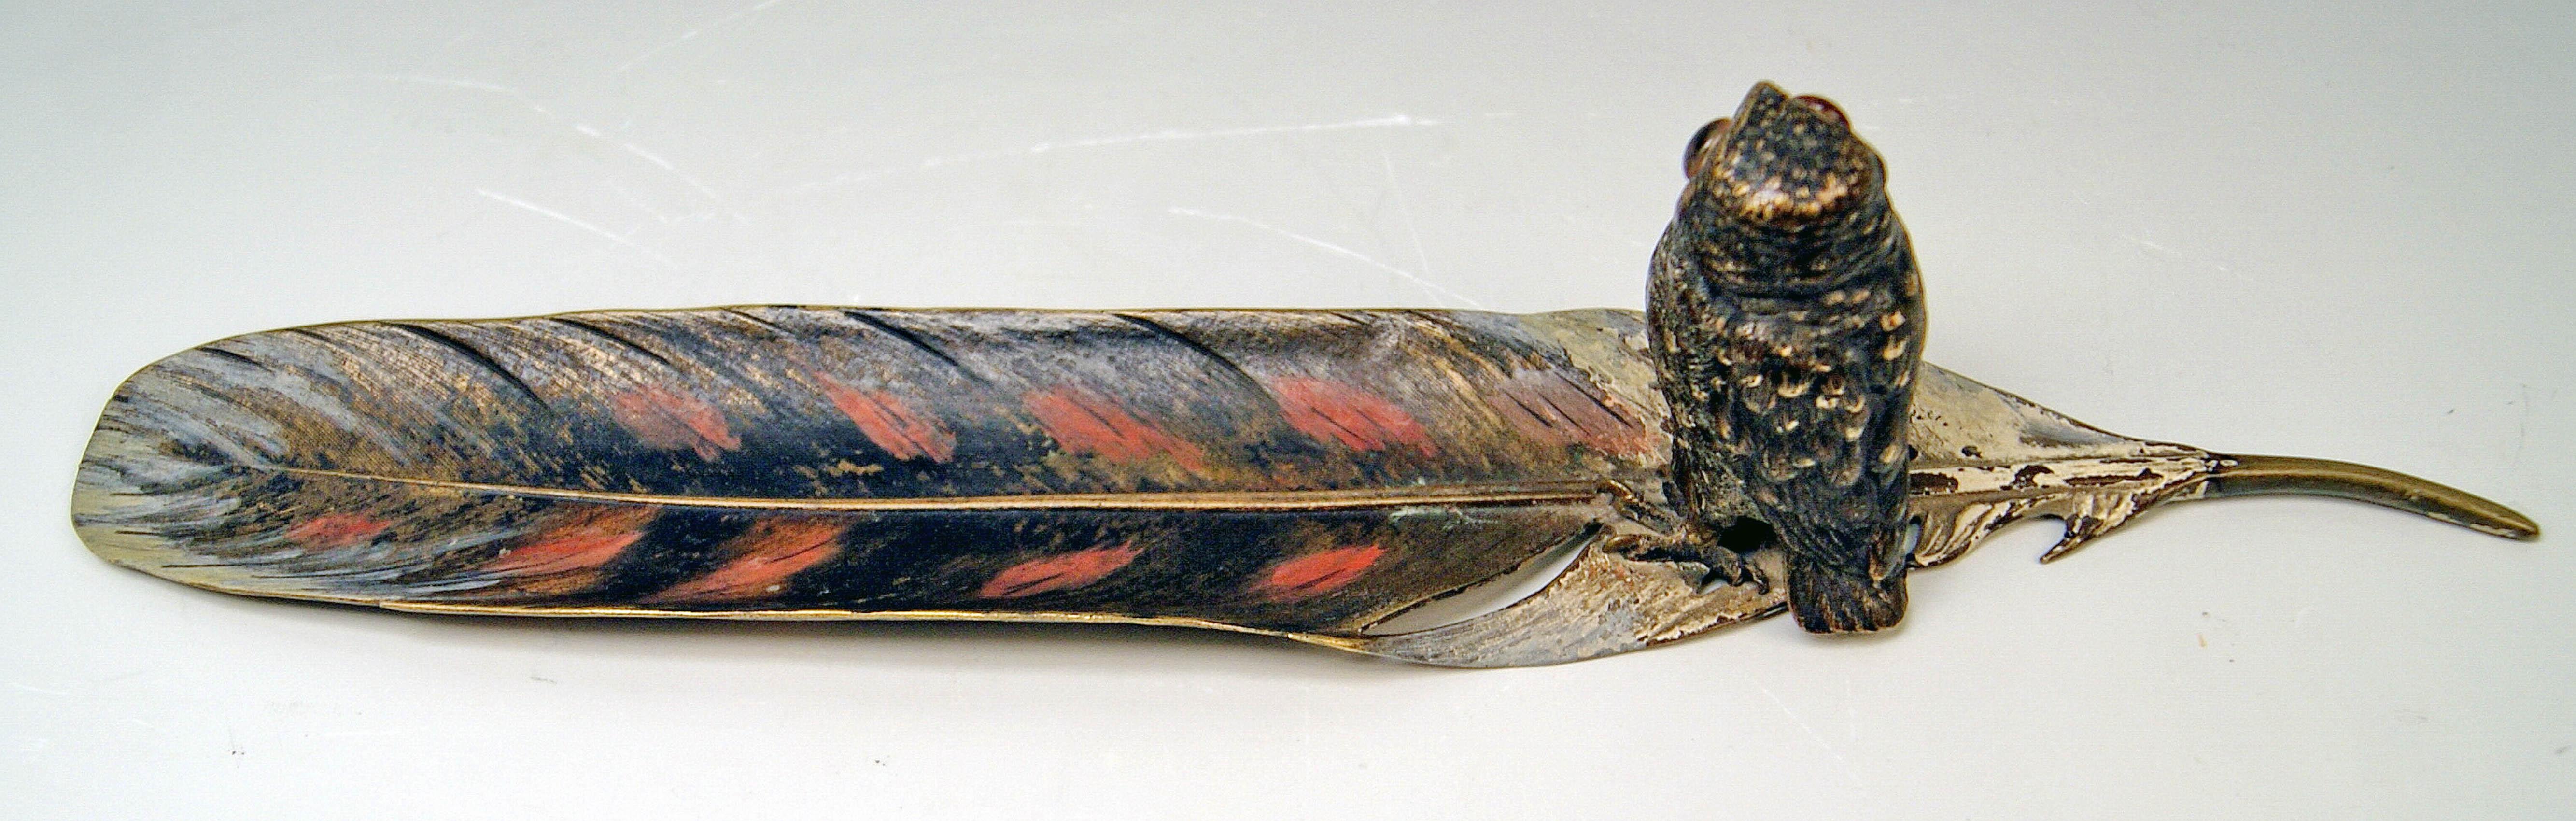 Late 19th Century Vienna Bergman Bronze Owl Situated on Feather Made circa 1890-1900